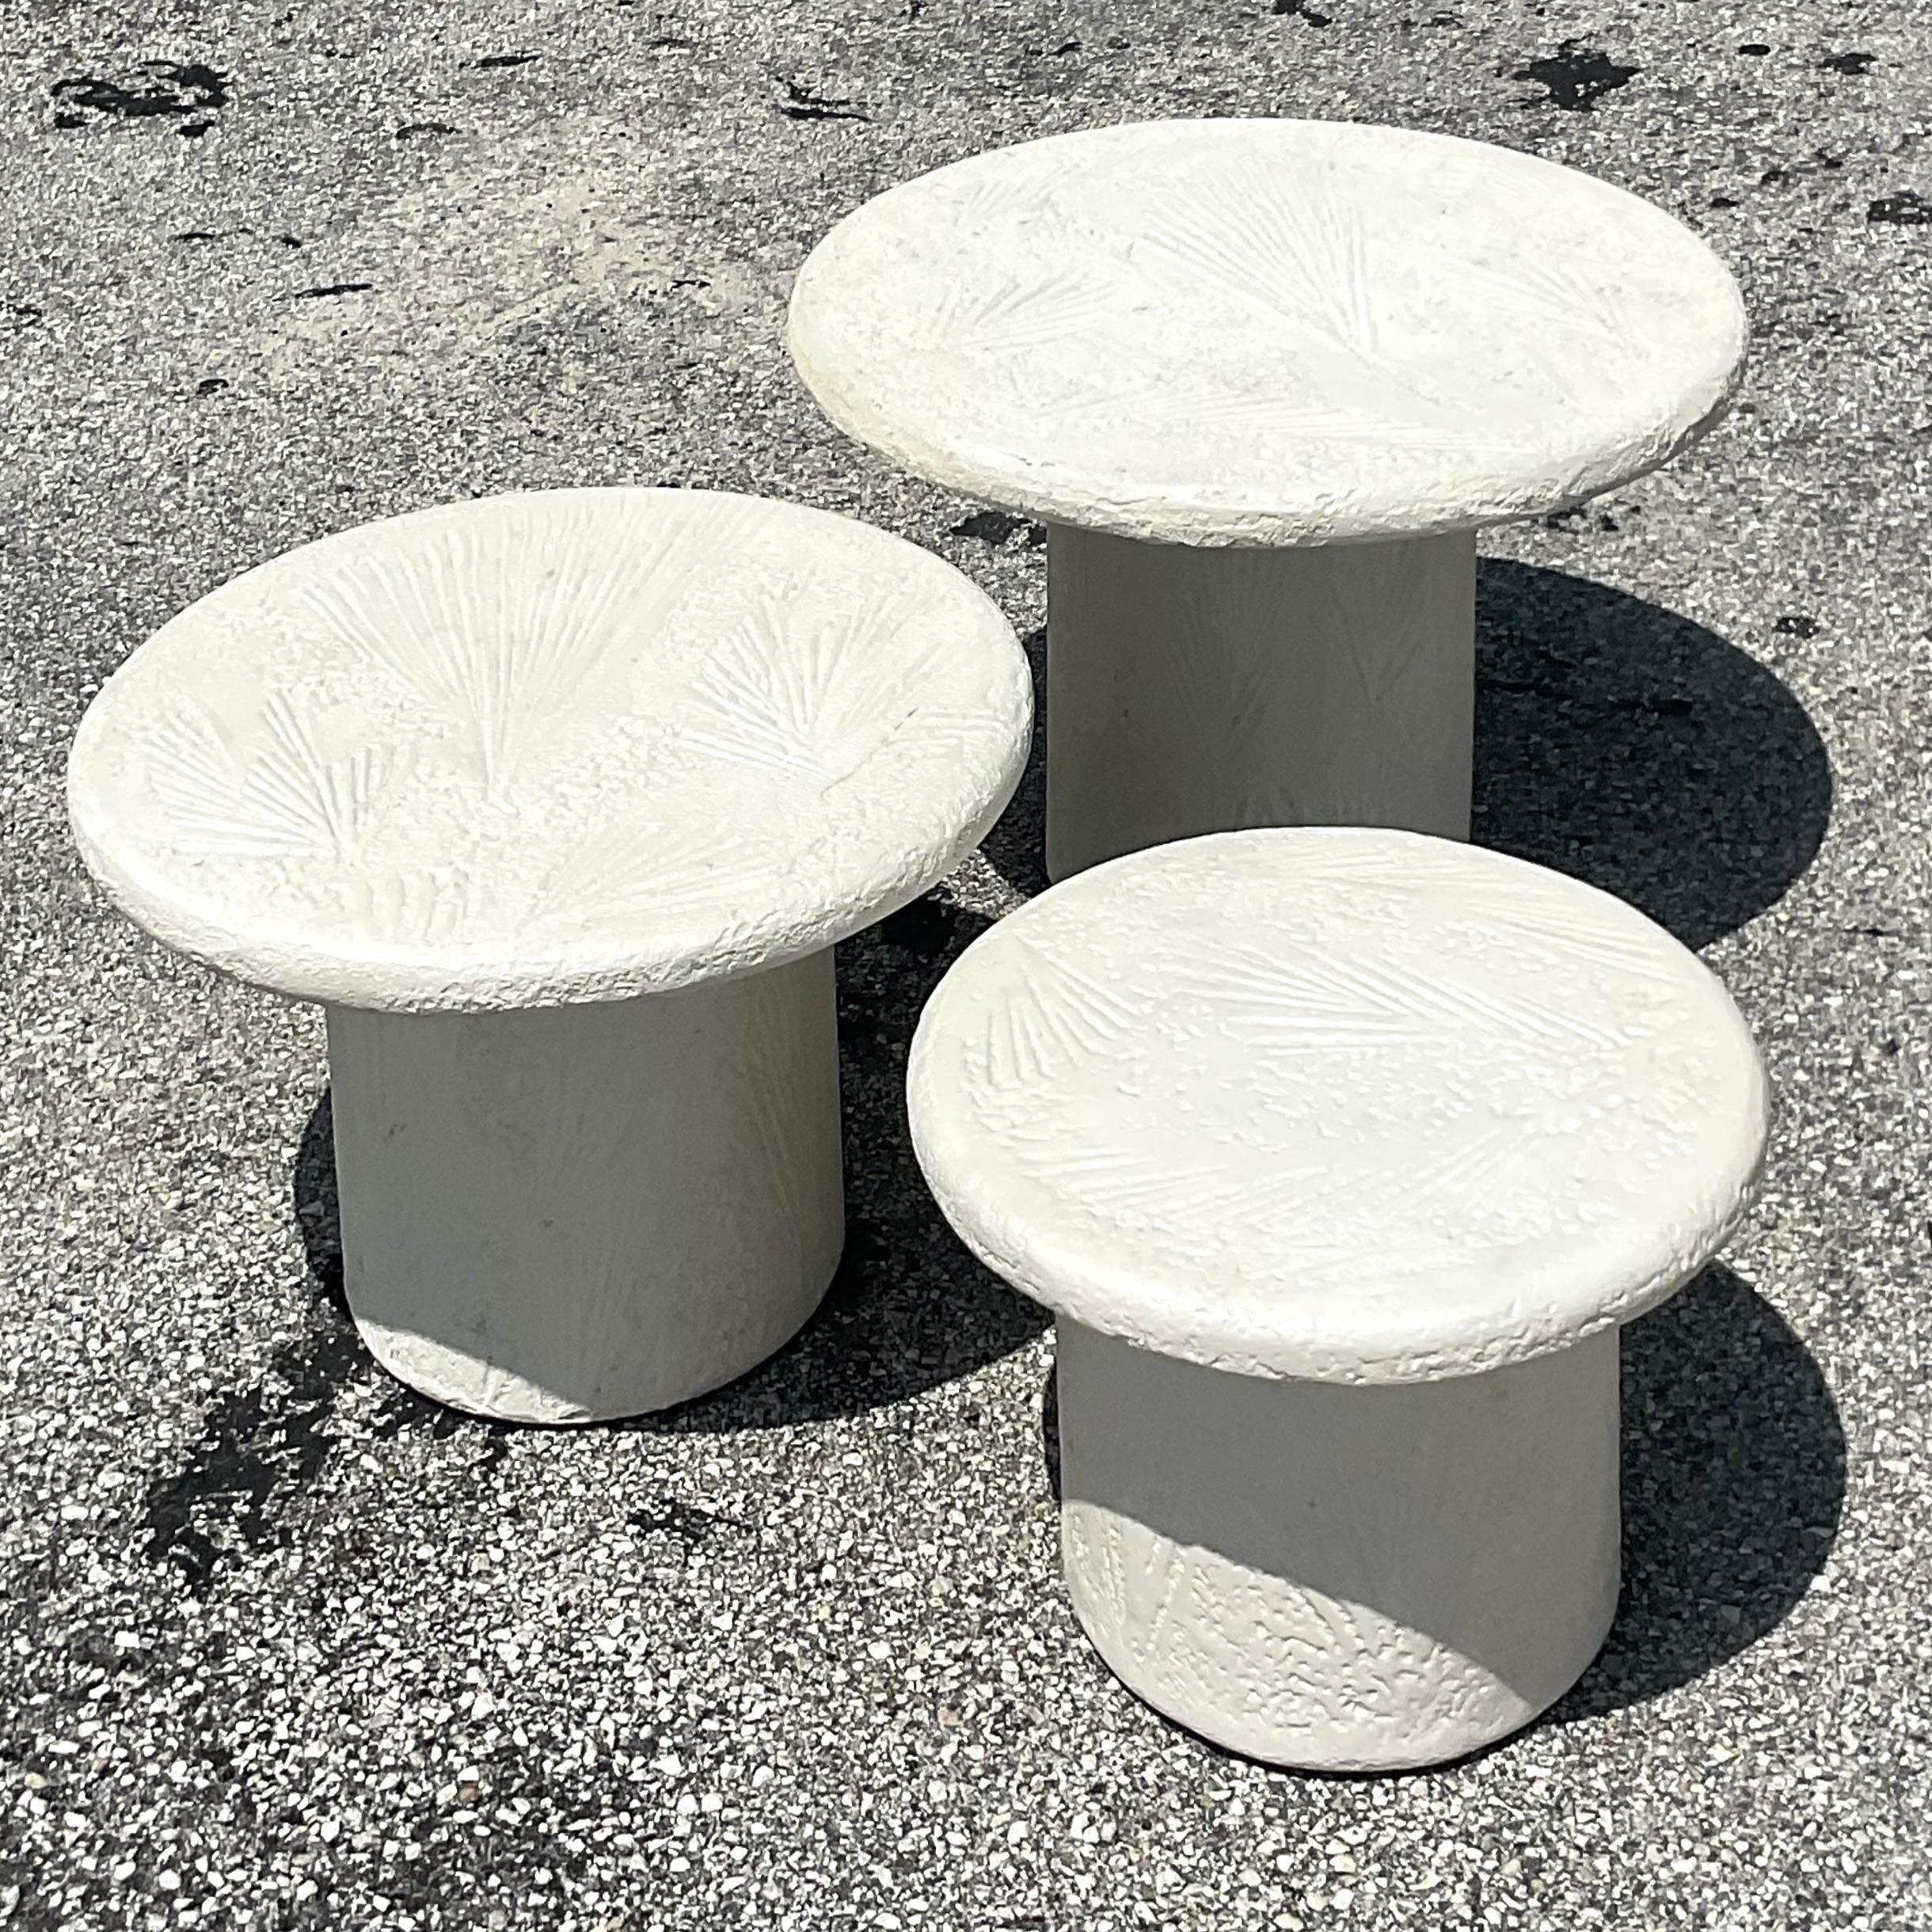 A fabulous set of three vintage plaster drinks table. Chic pressed coral design with a plaster finish. Perfect as drinks tables, side tables or even together as a coffee table. You decide! Acquired from a Palm Beach estate.

Table 2 - 20x20x14
Table